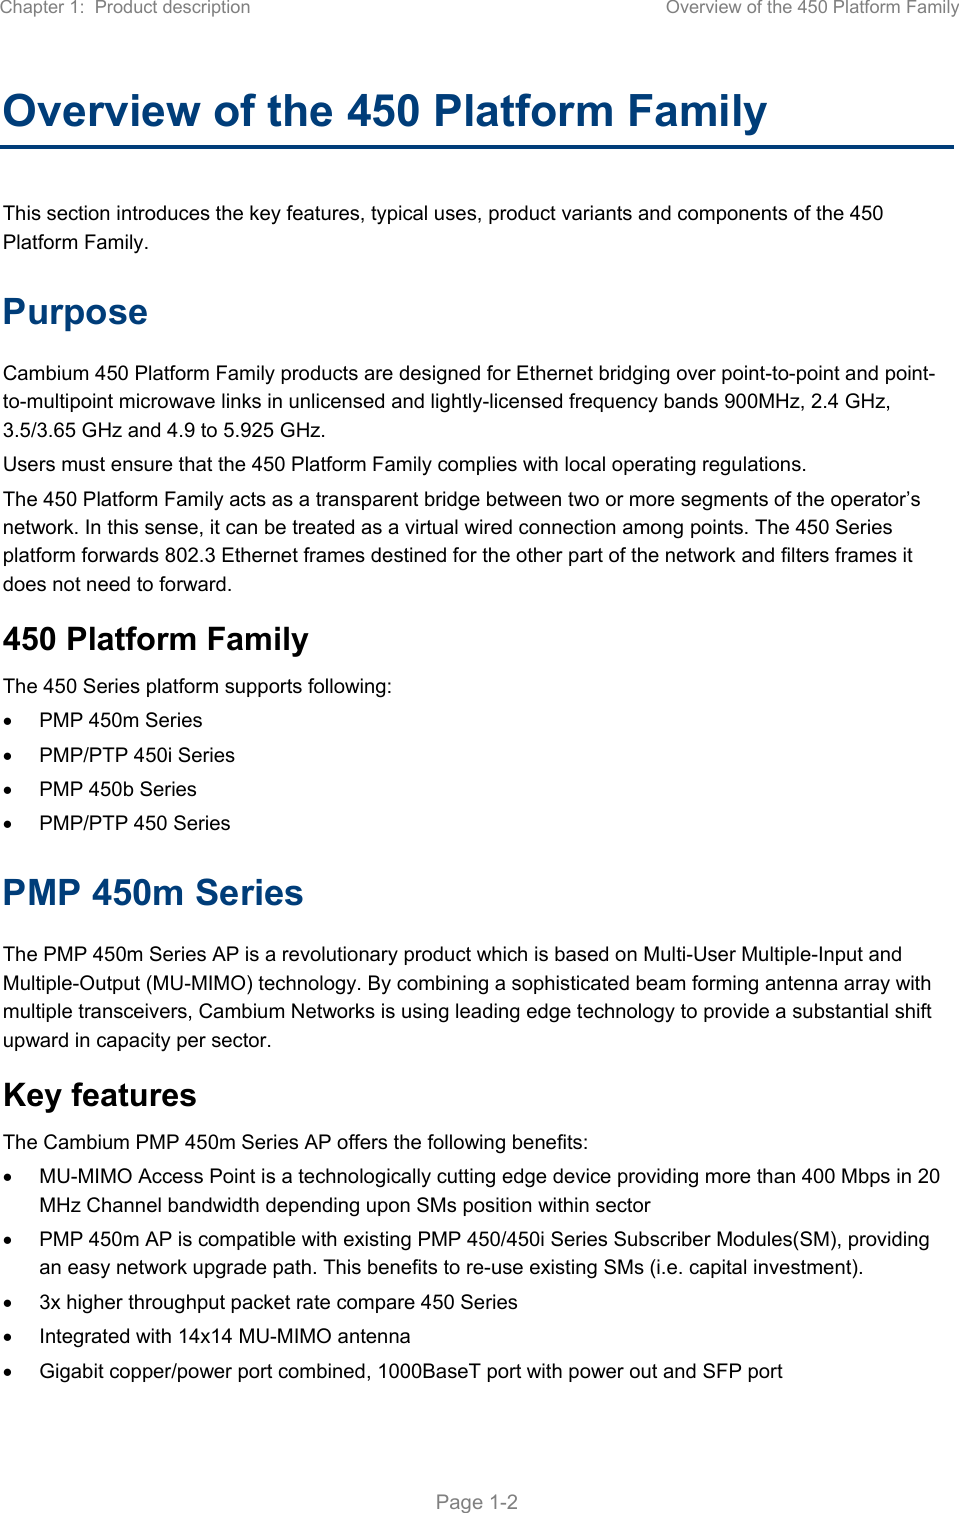 Chapter 1:  Product description  Overview of the 450 Platform Family   Page 1-2 Overview of the 450 Platform Family  This section introduces the key features, typical uses, product variants and components of the 450 Platform Family. Purpose Cambium 450 Platform Family products are designed for Ethernet bridging over point-to-point and point-to-multipoint microwave links in unlicensed and lightly-licensed frequency bands 900MHz, 2.4 GHz, 3.5/3.65 GHz and 4.9 to 5.925 GHz. Users must ensure that the 450 Platform Family complies with local operating regulations. The 450 Platform Family acts as a transparent bridge between two or more segments of the operator’s network. In this sense, it can be treated as a virtual wired connection among points. The 450 Series platform forwards 802.3 Ethernet frames destined for the other part of the network and filters frames it does not need to forward.  450 Platform Family The 450 Series platform supports following:   PMP 450m Series   PMP/PTP 450i Series   PMP 450b Series    PMP/PTP 450 Series PMP 450m Series The PMP 450m Series AP is a revolutionary product which is based on Multi-User Multiple-Input and Multiple-Output (MU-MIMO) technology. By combining a sophisticated beam forming antenna array with multiple transceivers, Cambium Networks is using leading edge technology to provide a substantial shift upward in capacity per sector. Key features The Cambium PMP 450m Series AP offers the following benefits:   MU-MIMO Access Point is a technologically cutting edge device providing more than 400 Mbps in 20 MHz Channel bandwidth depending upon SMs position within sector   PMP 450m AP is compatible with existing PMP 450/450i Series Subscriber Modules(SM), providing an easy network upgrade path. This benefits to re-use existing SMs (i.e. capital investment).   3x higher throughput packet rate compare 450 Series   Integrated with 14x14 MU-MIMO antenna   Gigabit copper/power port combined, 1000BaseT port with power out and SFP port 